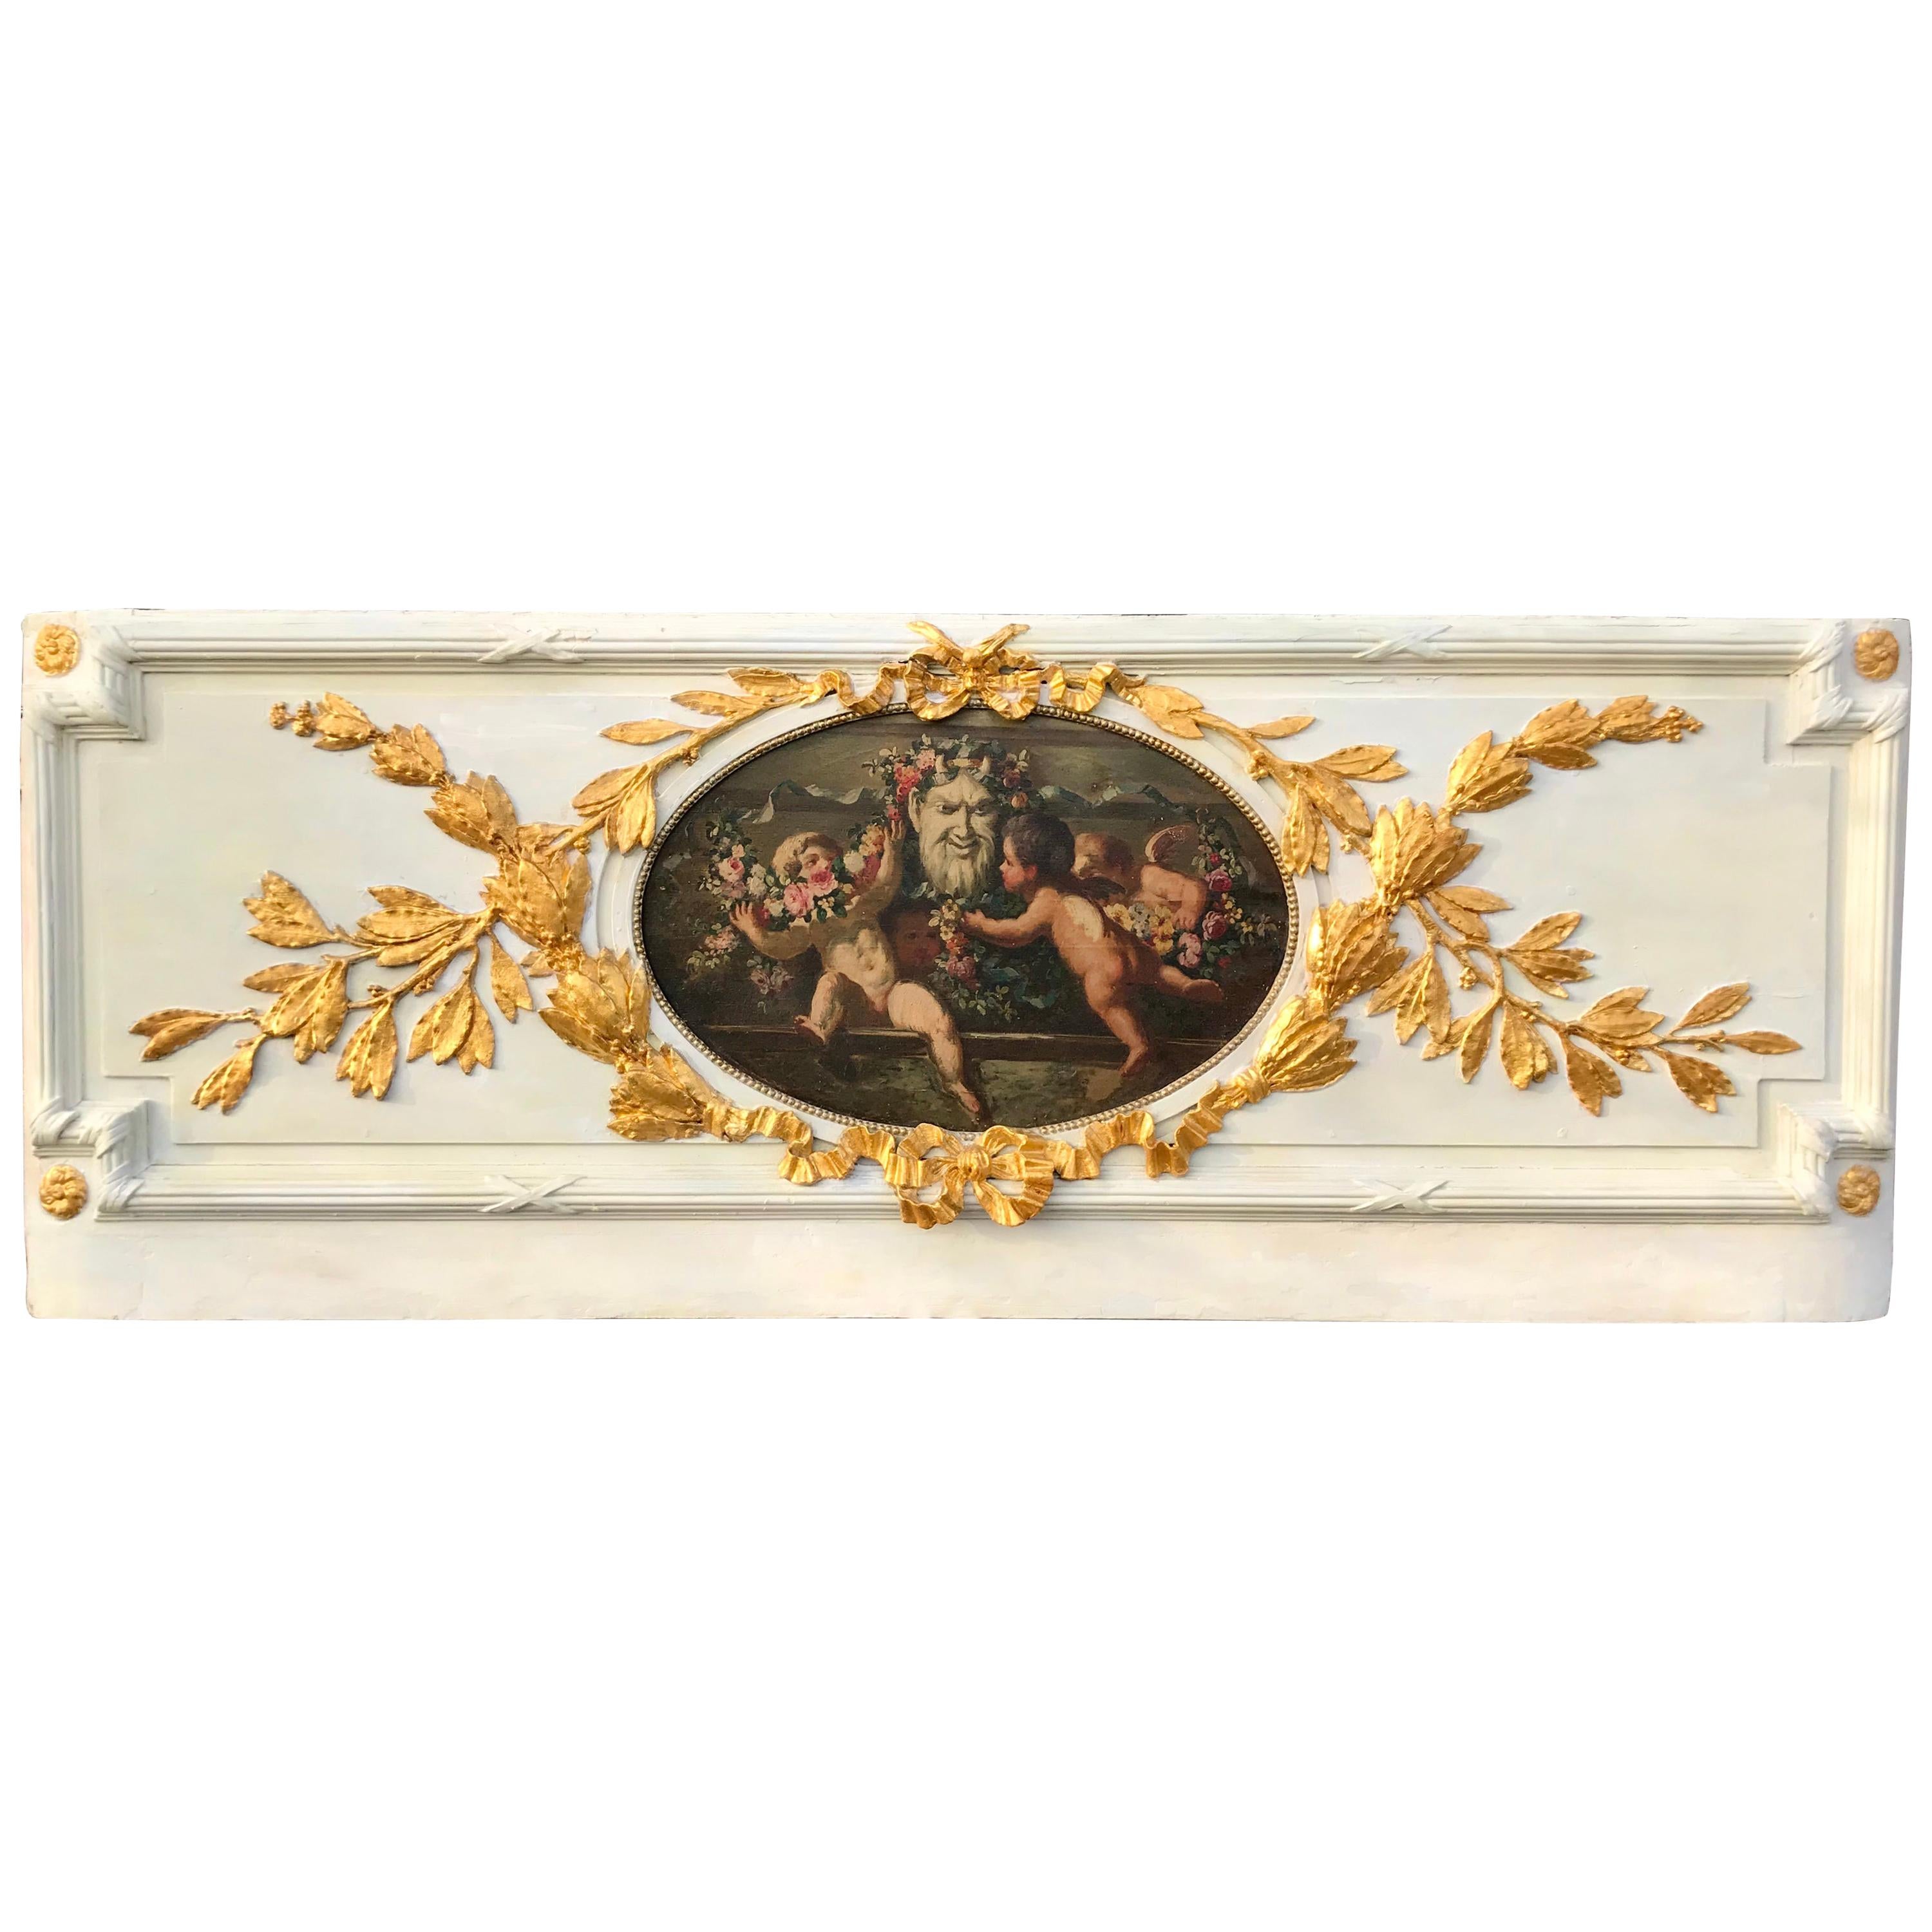 The architectural frieze fragment (Supra porta) removed from paneling. A decorated panel of Louis XVI style . The neoclassical styled panel with gilded leaf garland intertwined with ribbon surrounding a colorful oil inset of four cherubs or putti